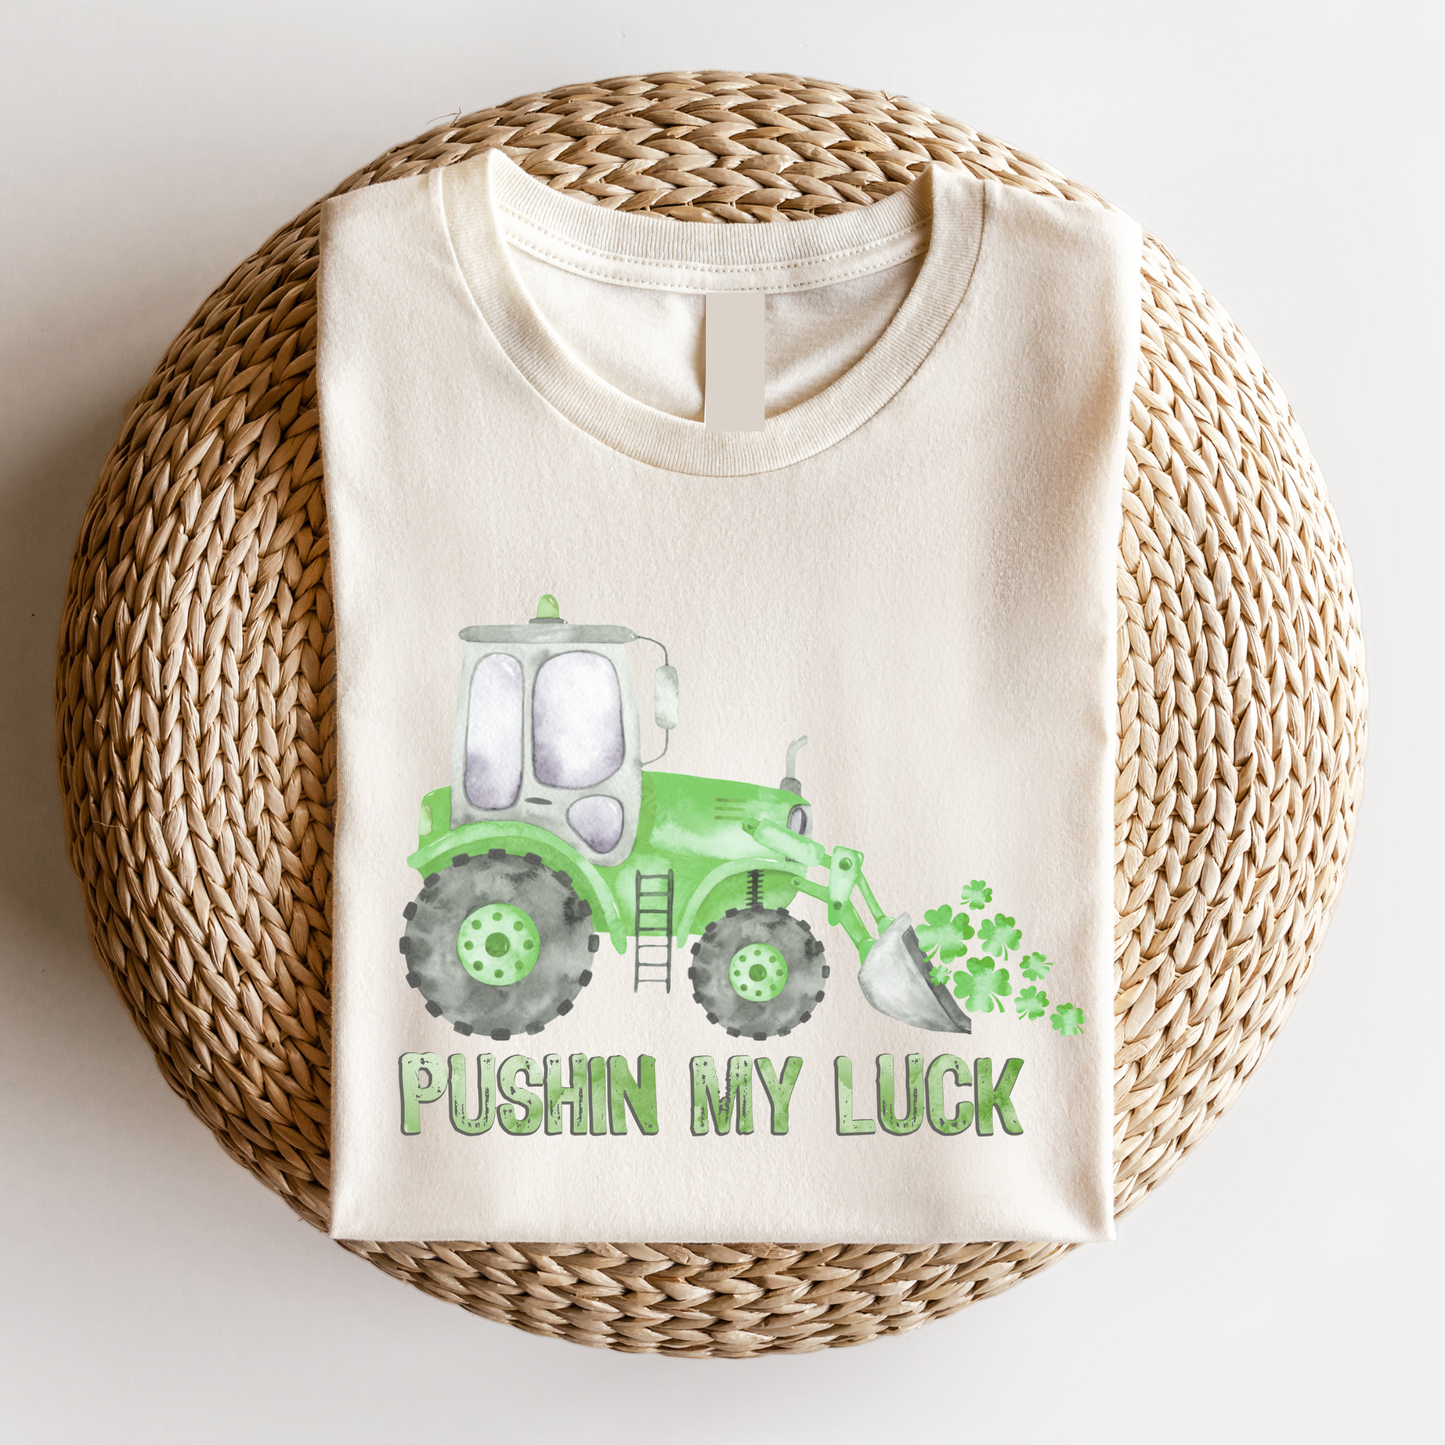 Pushing My Luck St. Patrick’s Day Graphic T-shirt